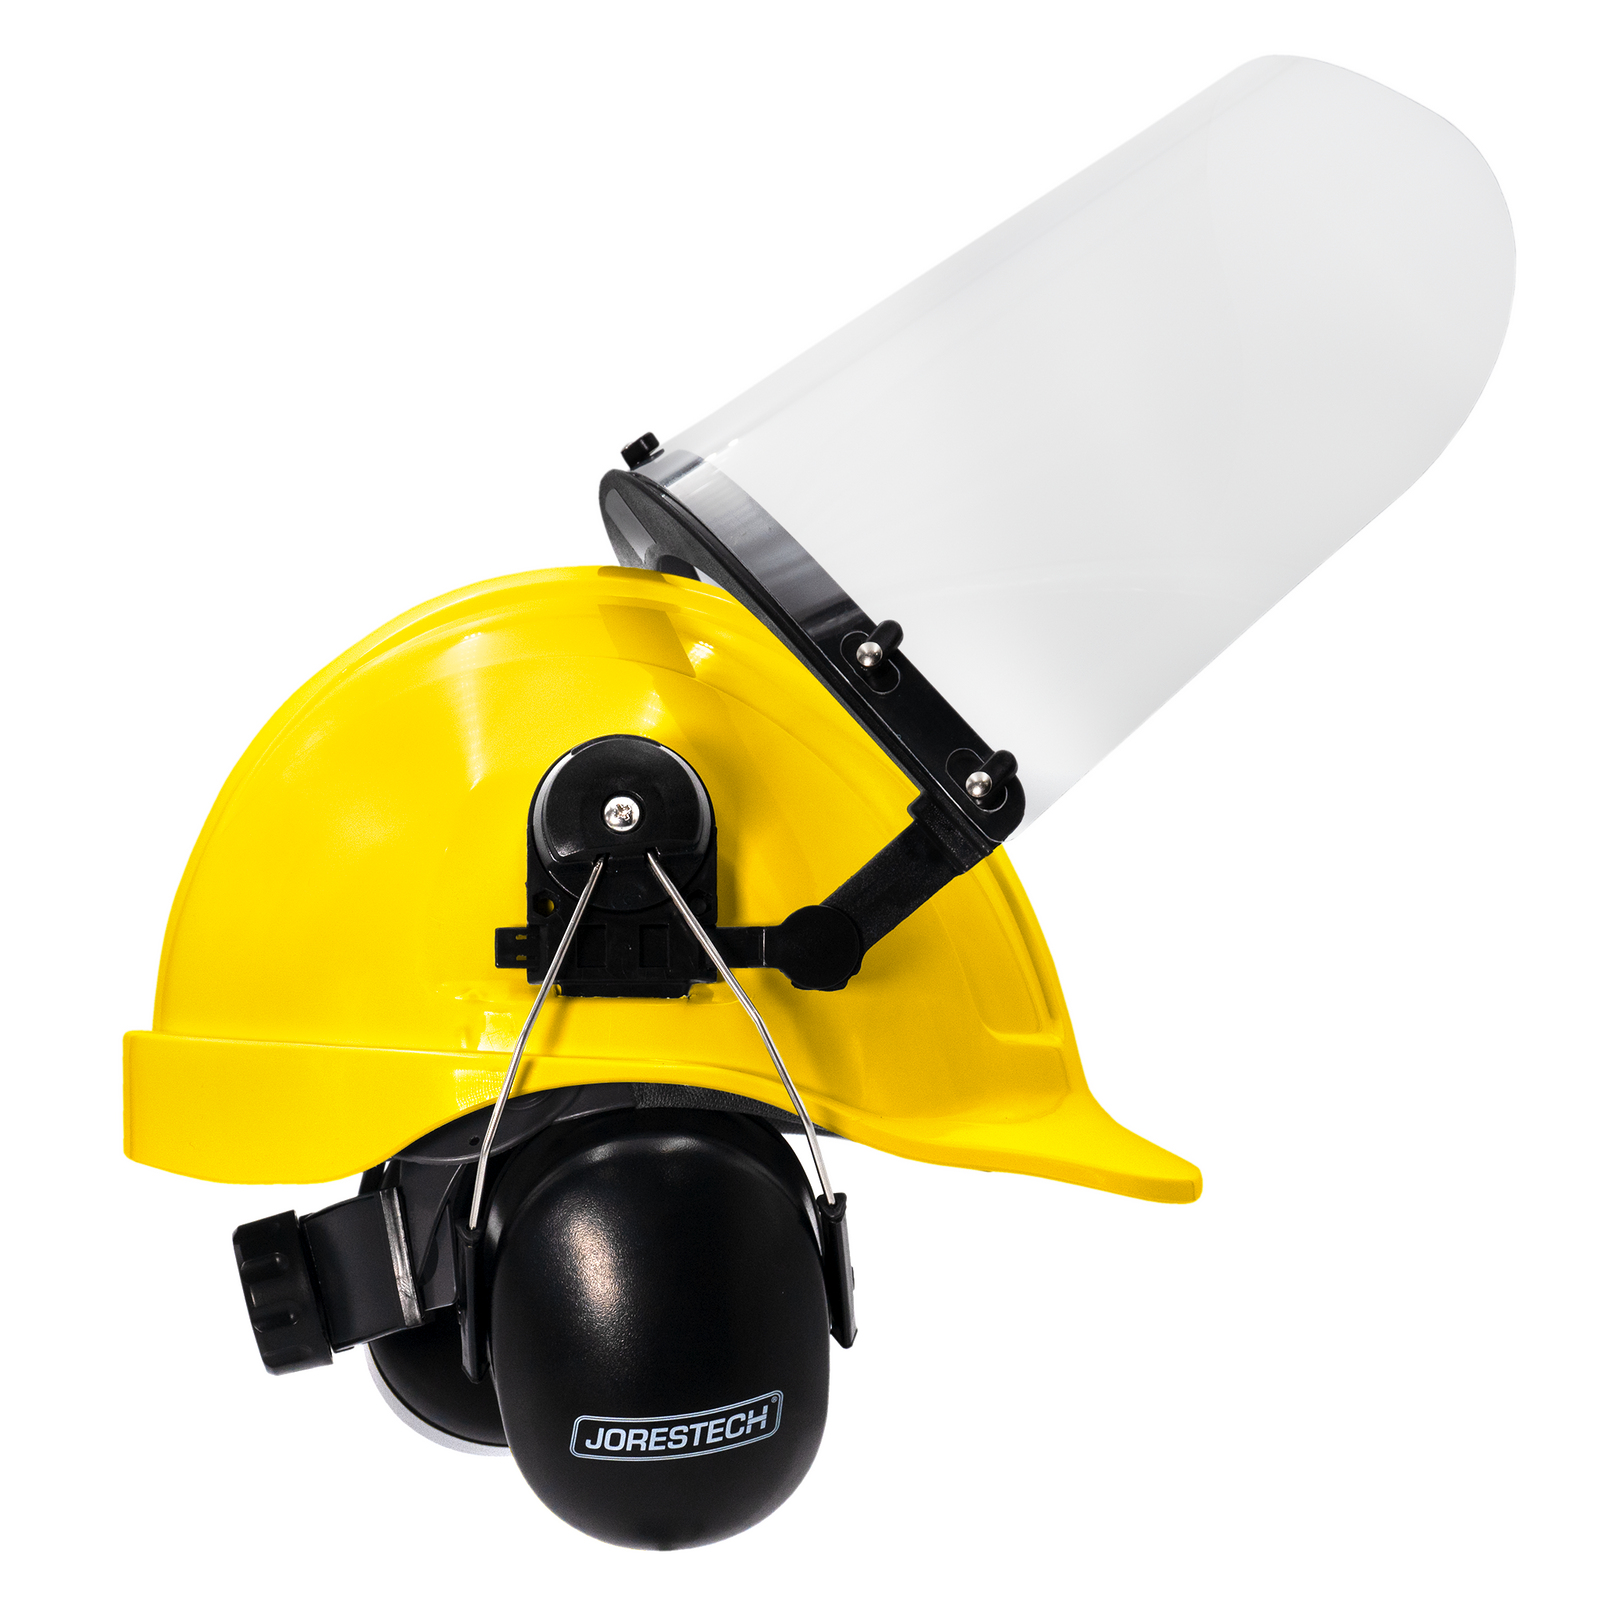 Yellow cap style hard hat kit with mountable earmuffs and hi-transparency face shield